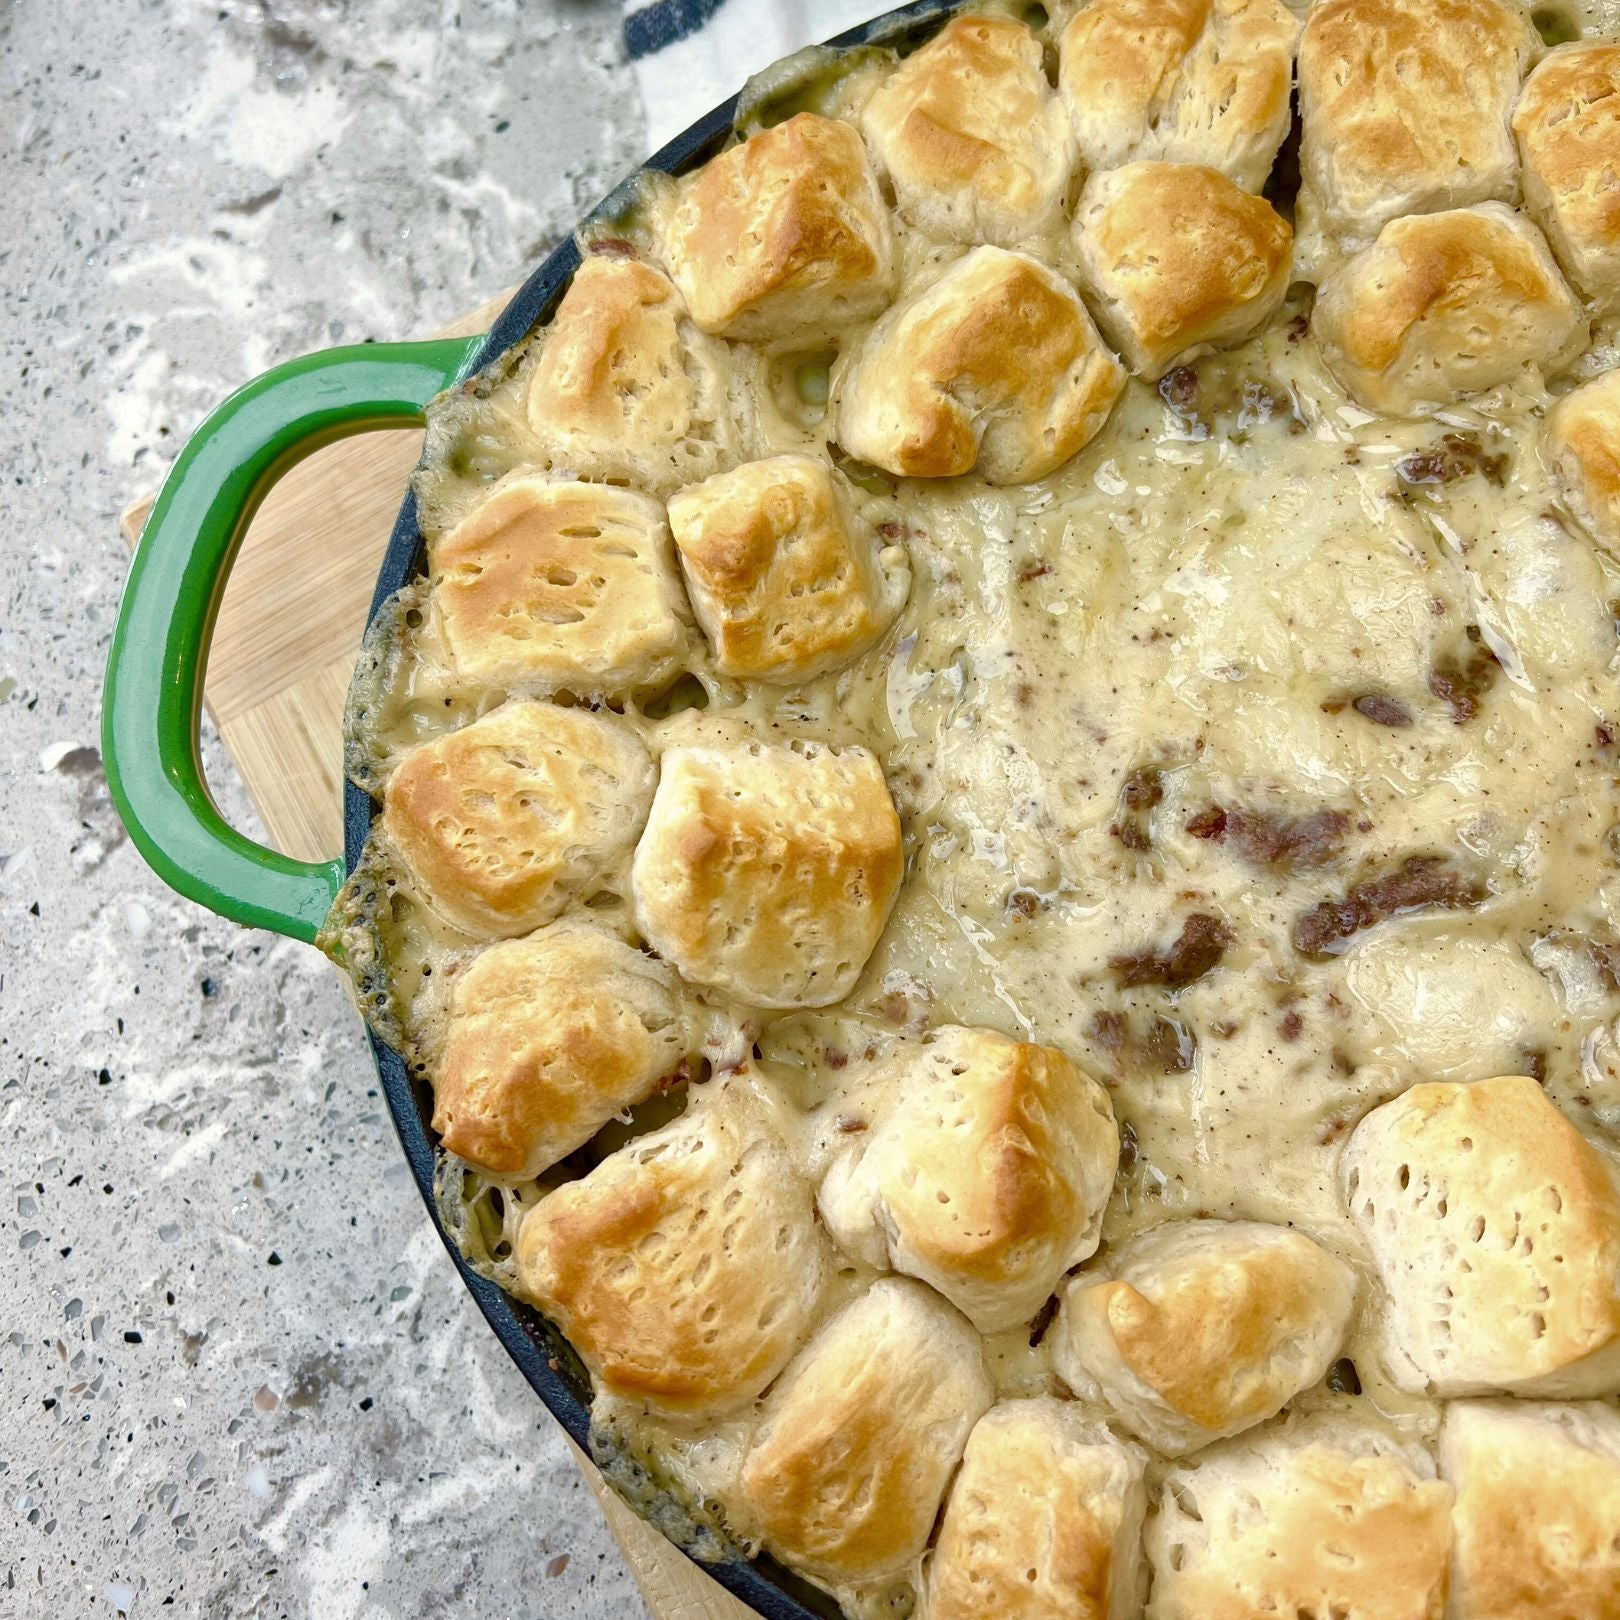 Biscuits and Gravy in a green Skillet